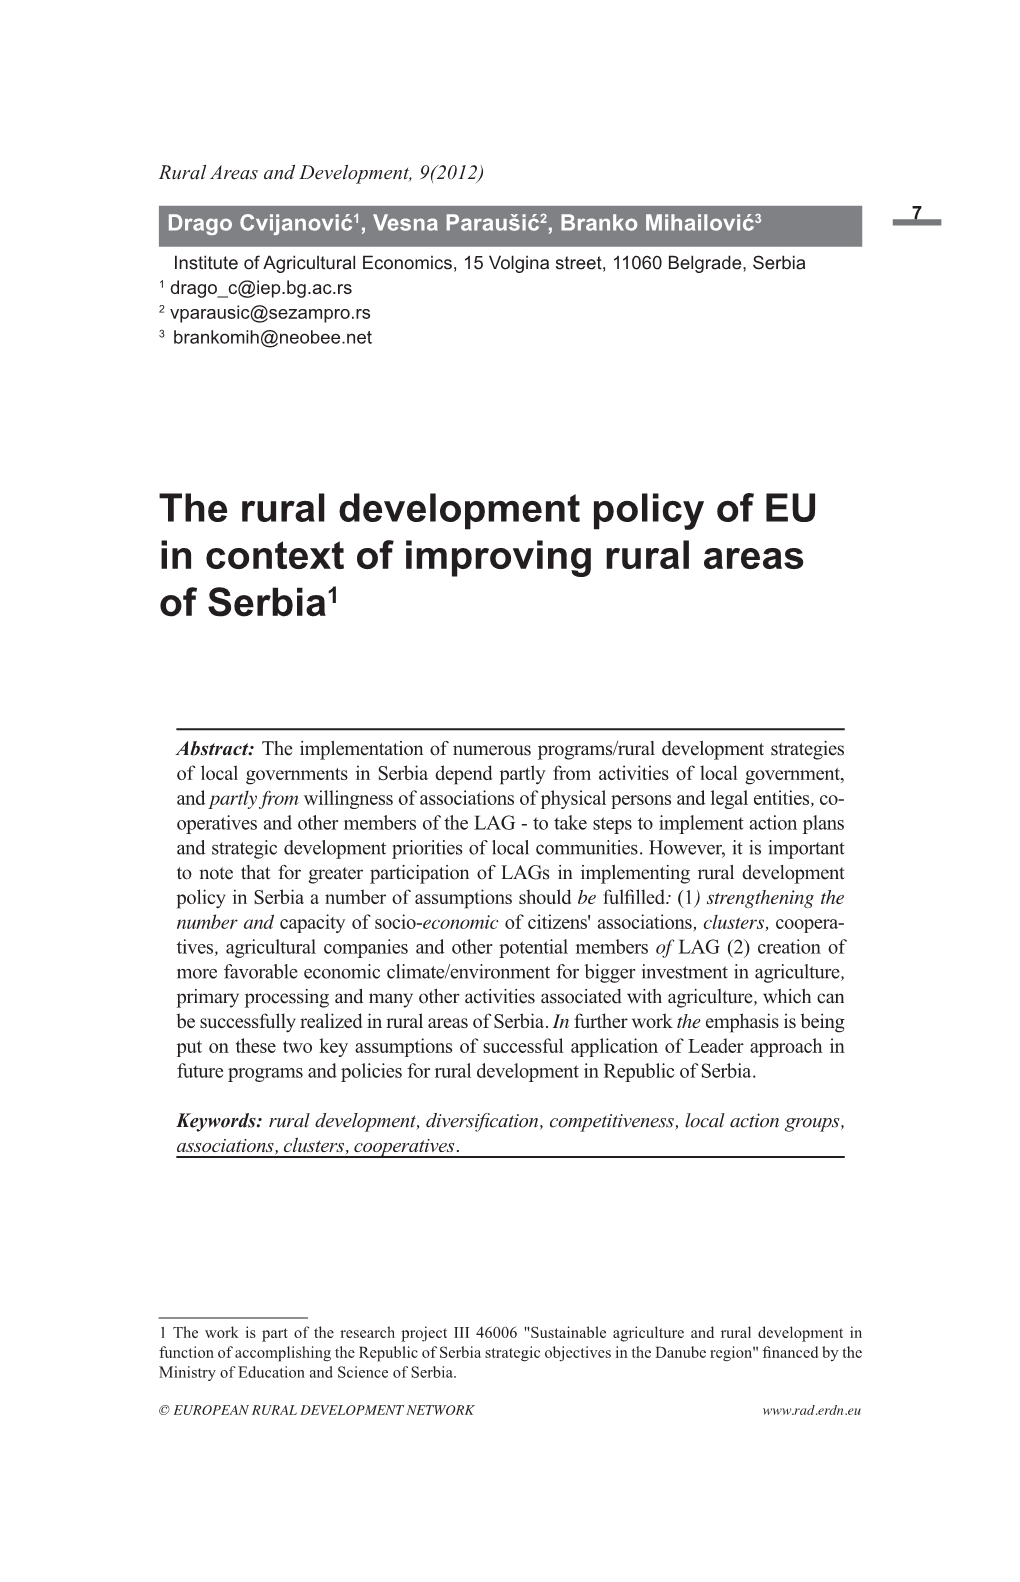 The Rural Development Policy of EU in Context of Improving Rural Areas of Serbia1